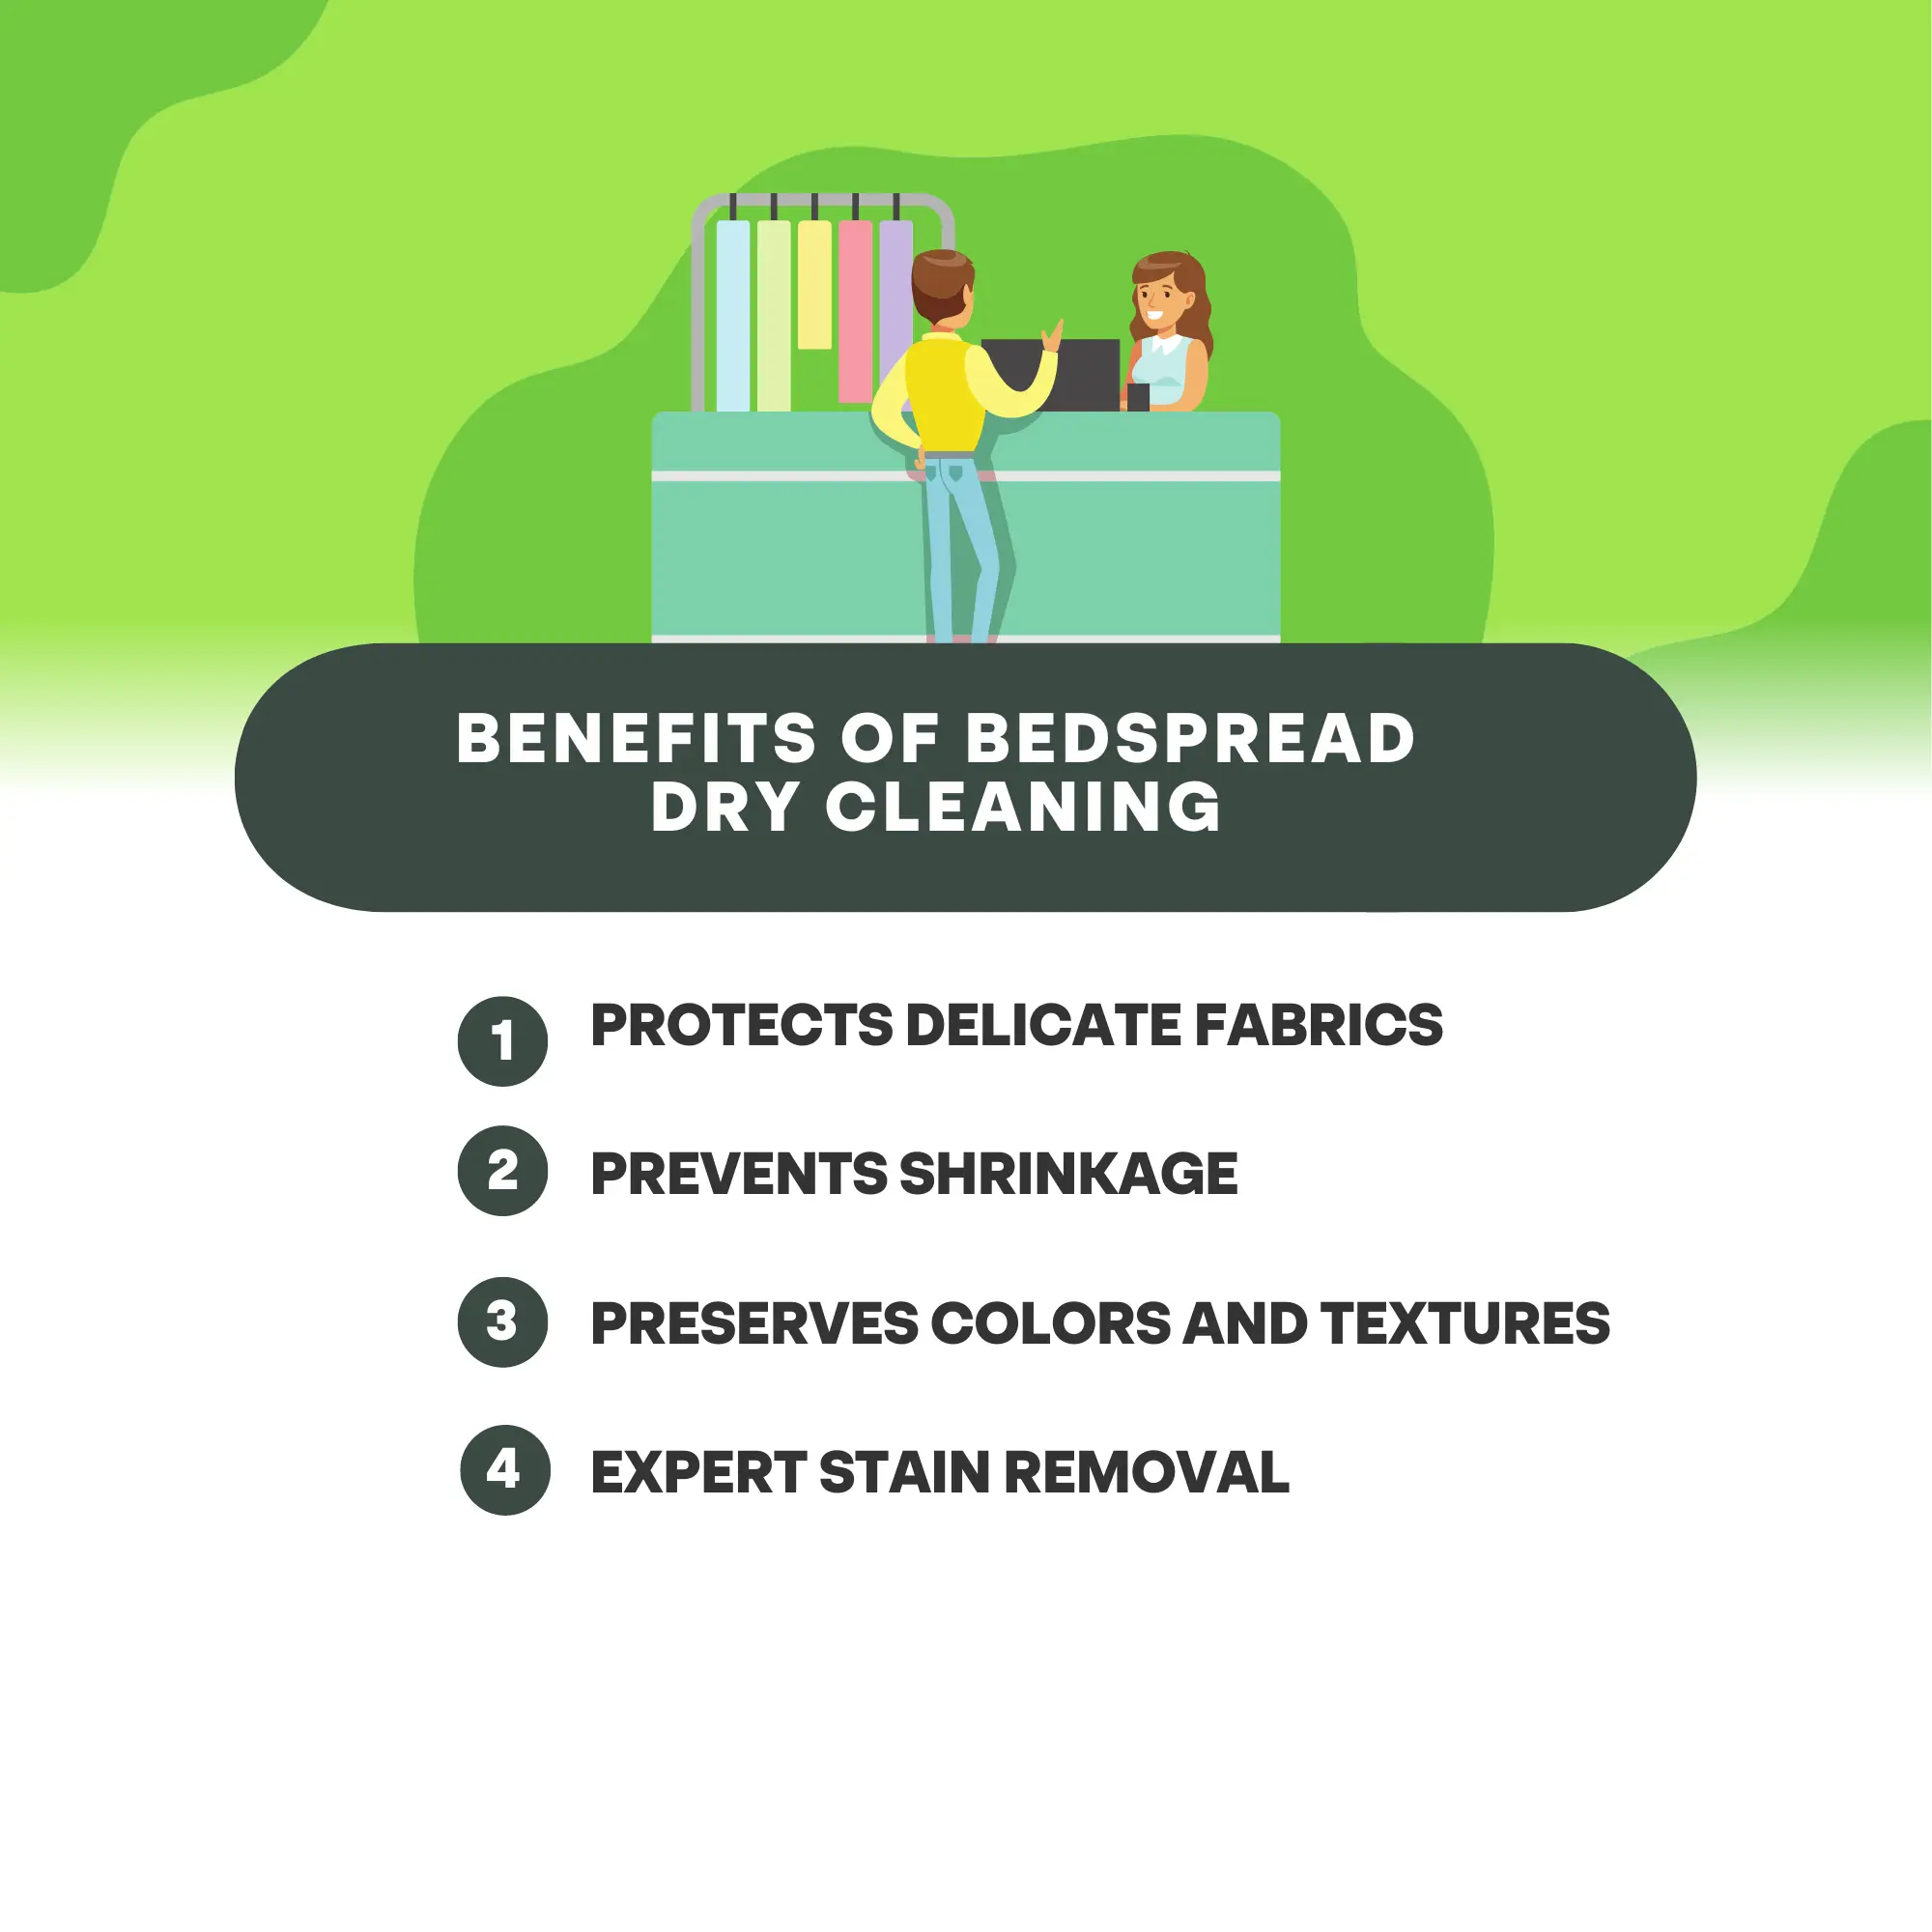 Benefits of Bedspread Dry Cleaning